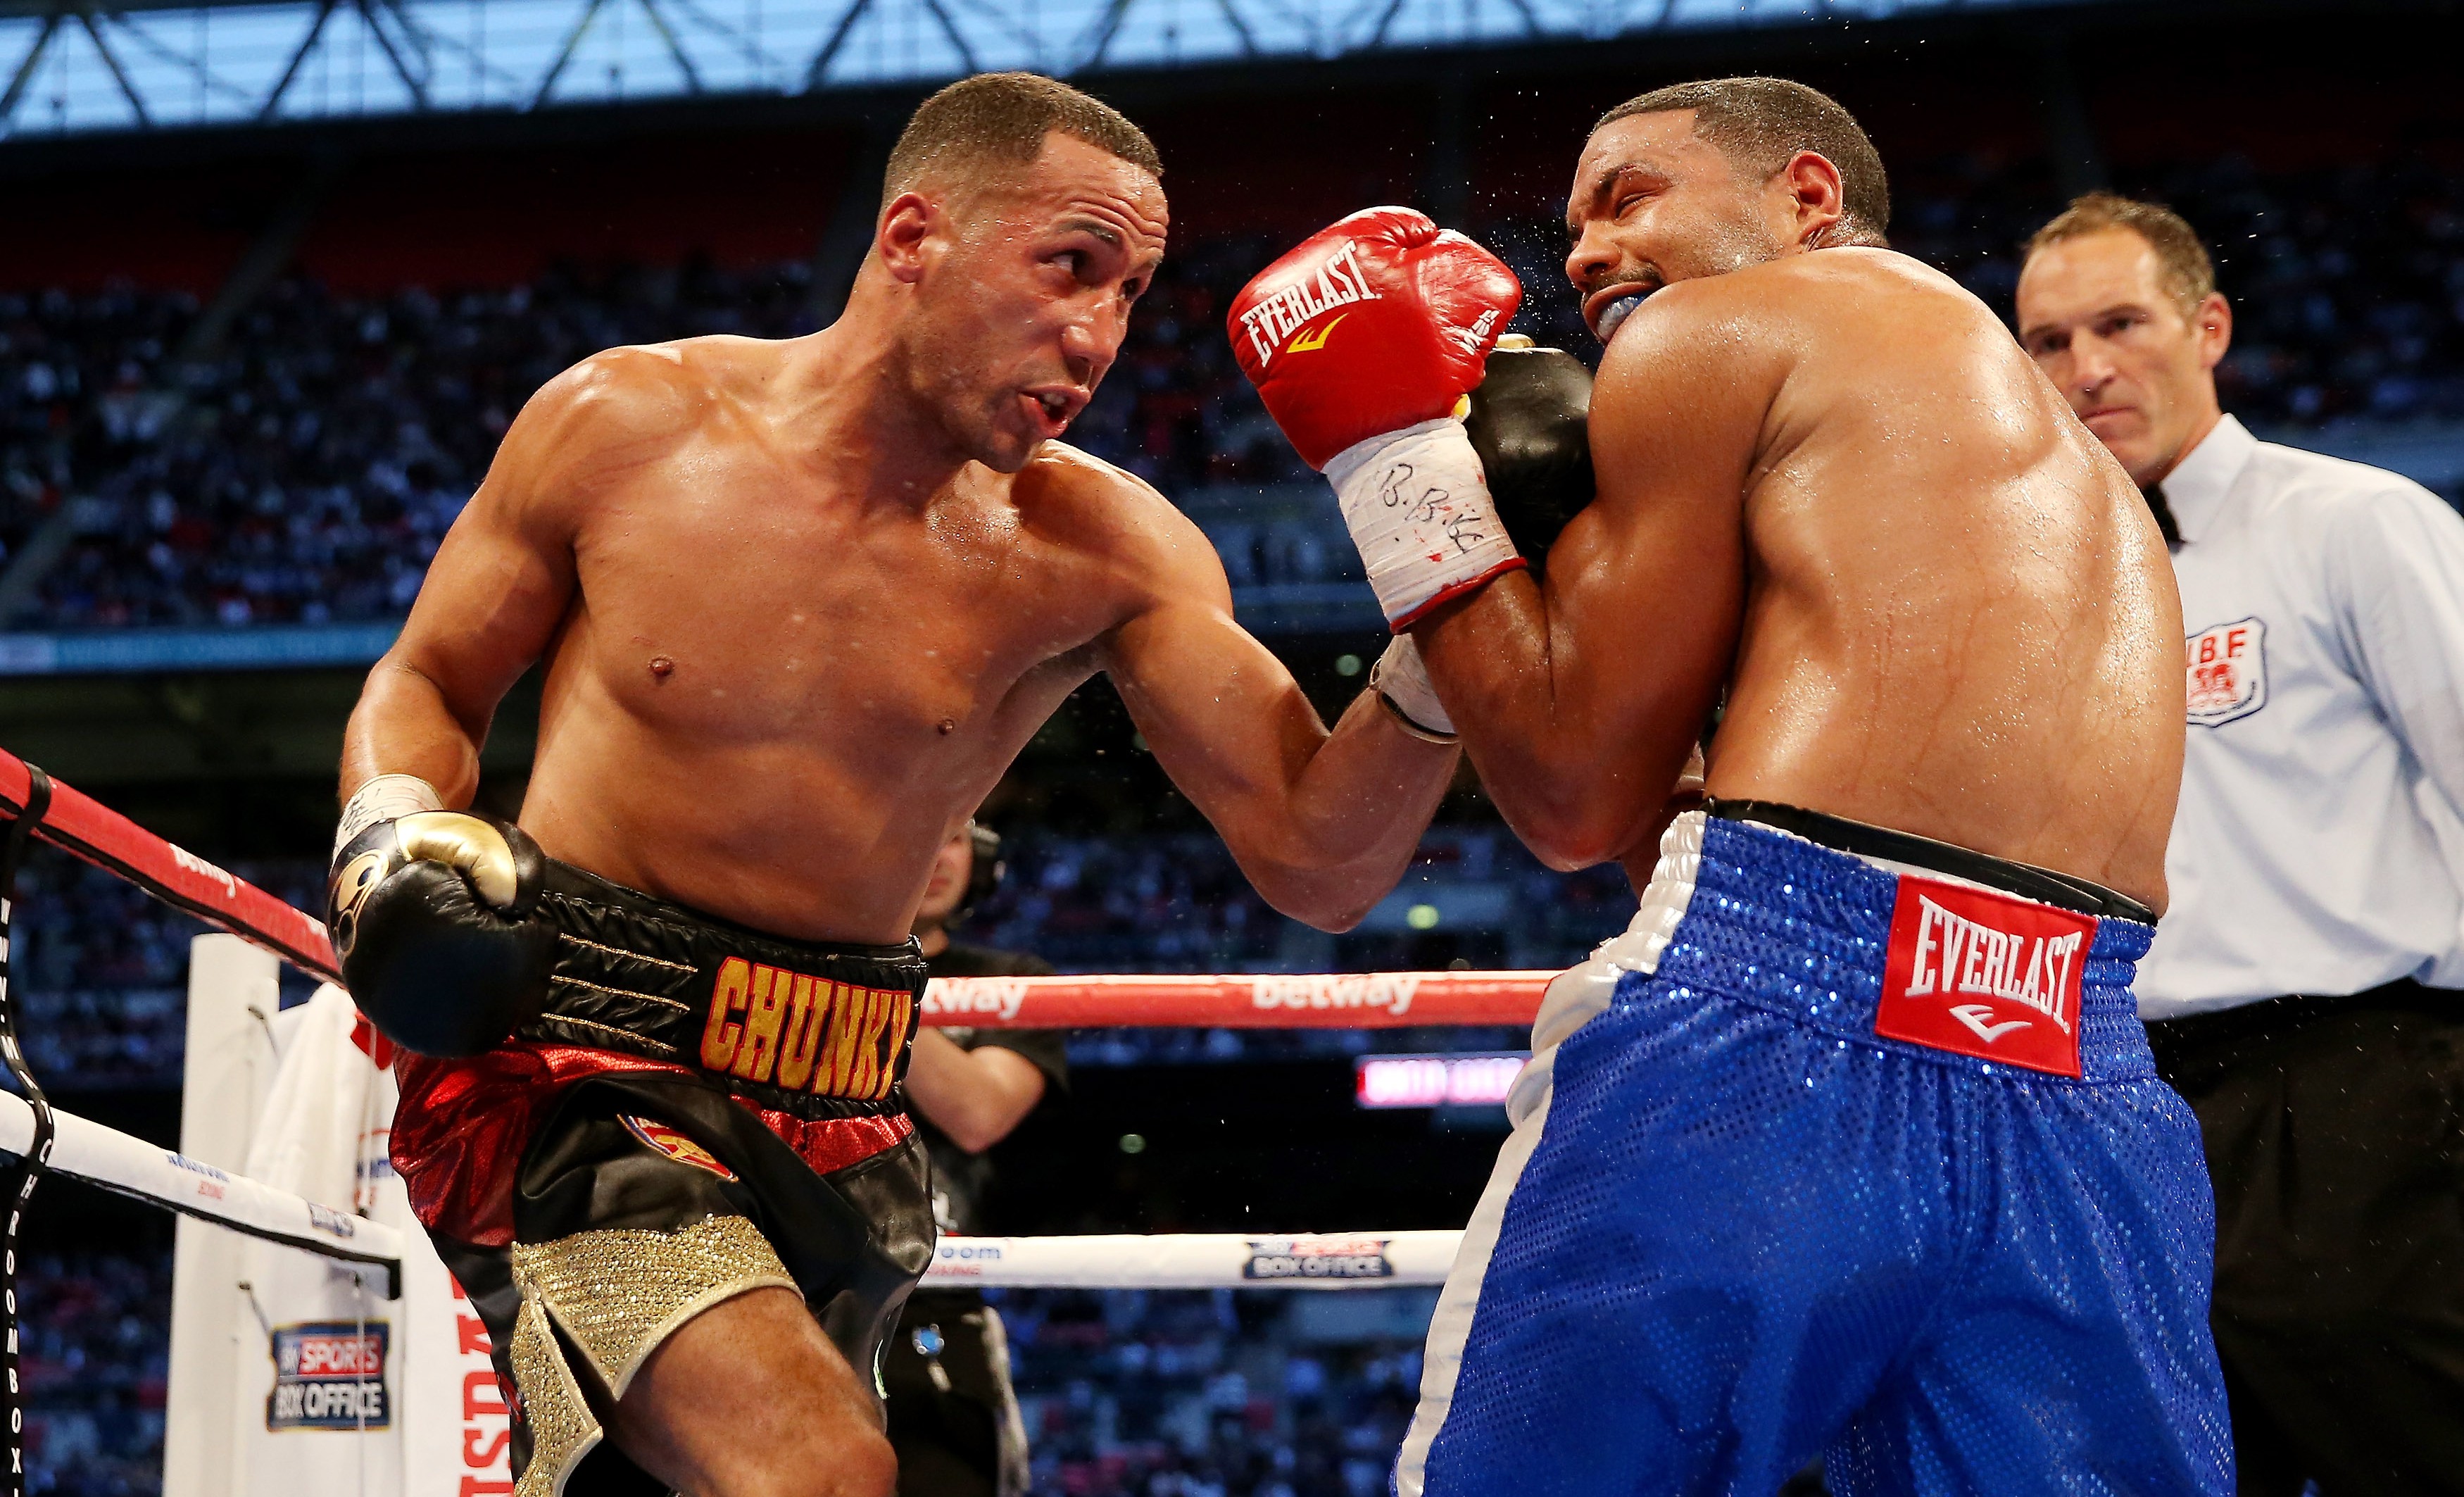 James Degale lands a left against Brandon Gonzales during their IBF World Super Middleweight Final Eliminator bout at Wembley Stadium on May 31, 2014 in London, England.  (Getty)